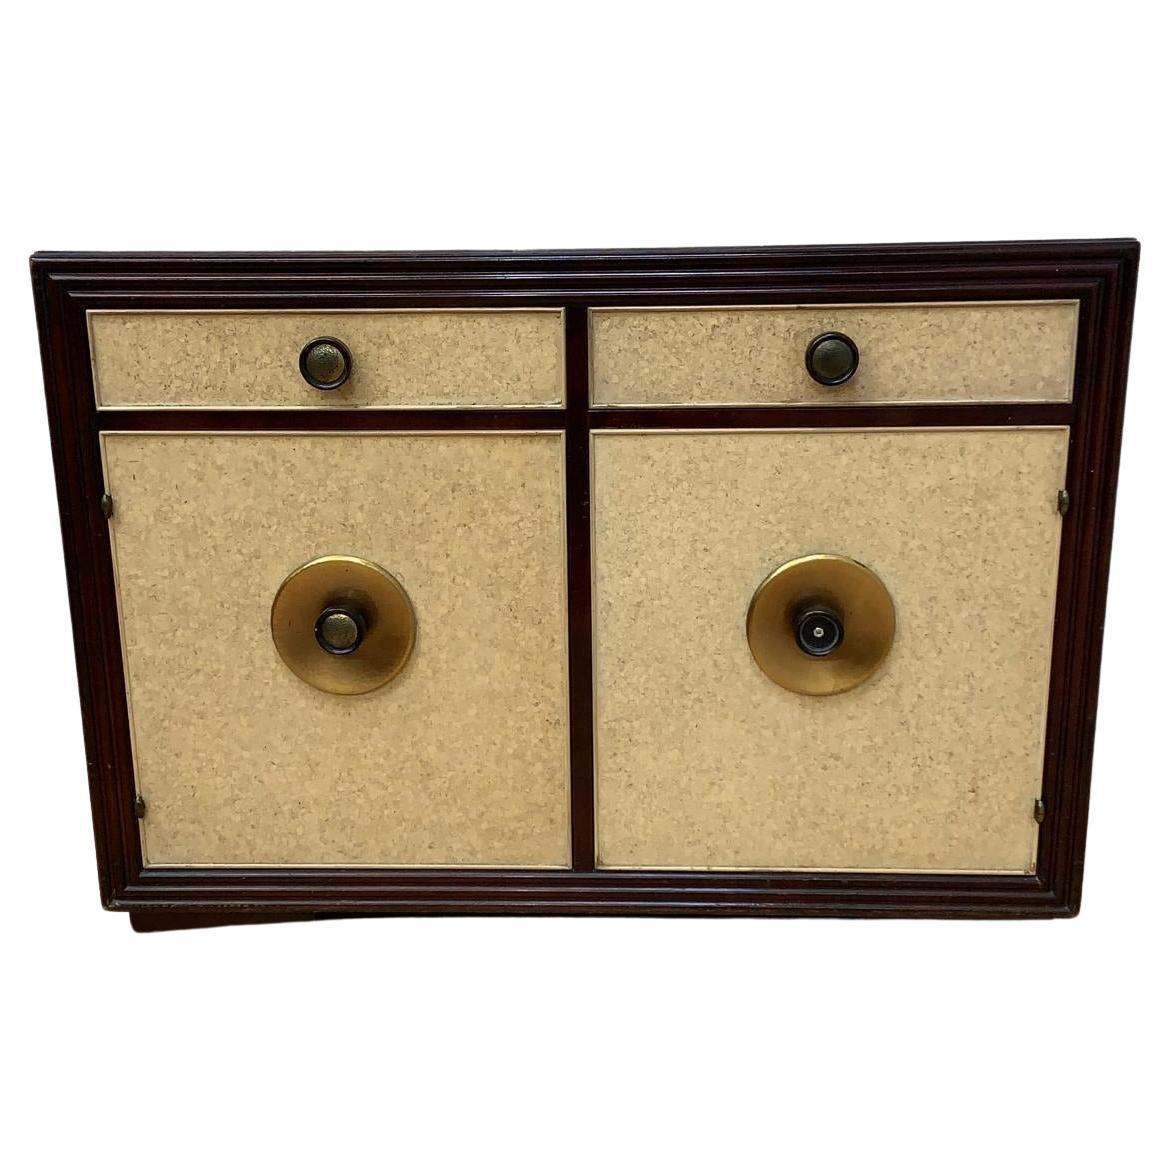 Art Deco Paul Frankl for Johnson Furniture Mahogany and Cork buffet cabinet

An exquisite, iconic and truly timeless and unparalleled classic, complete buffet and display case by Paul Frankl for Johnson Furniture Co. 

The 2 door breakfront